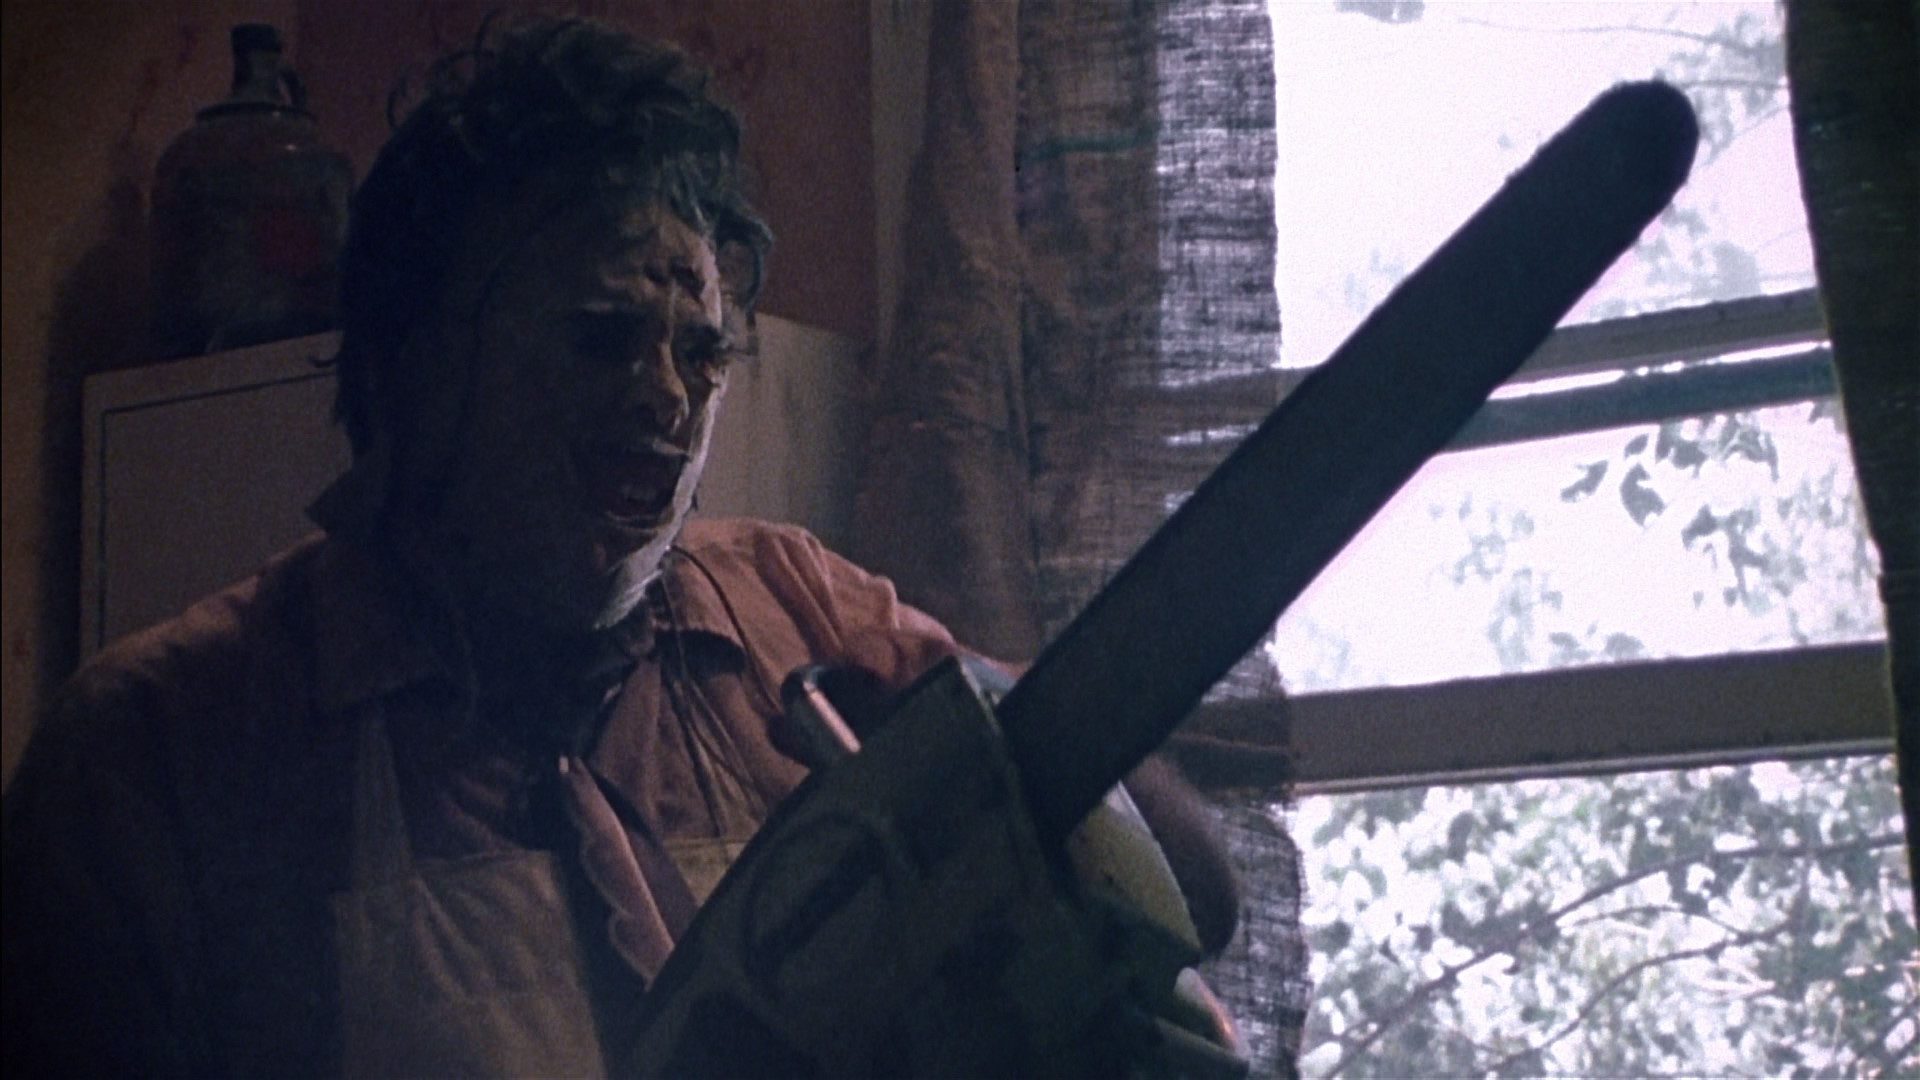 31 Days of Fright: The Texas Chainsaw Massacre